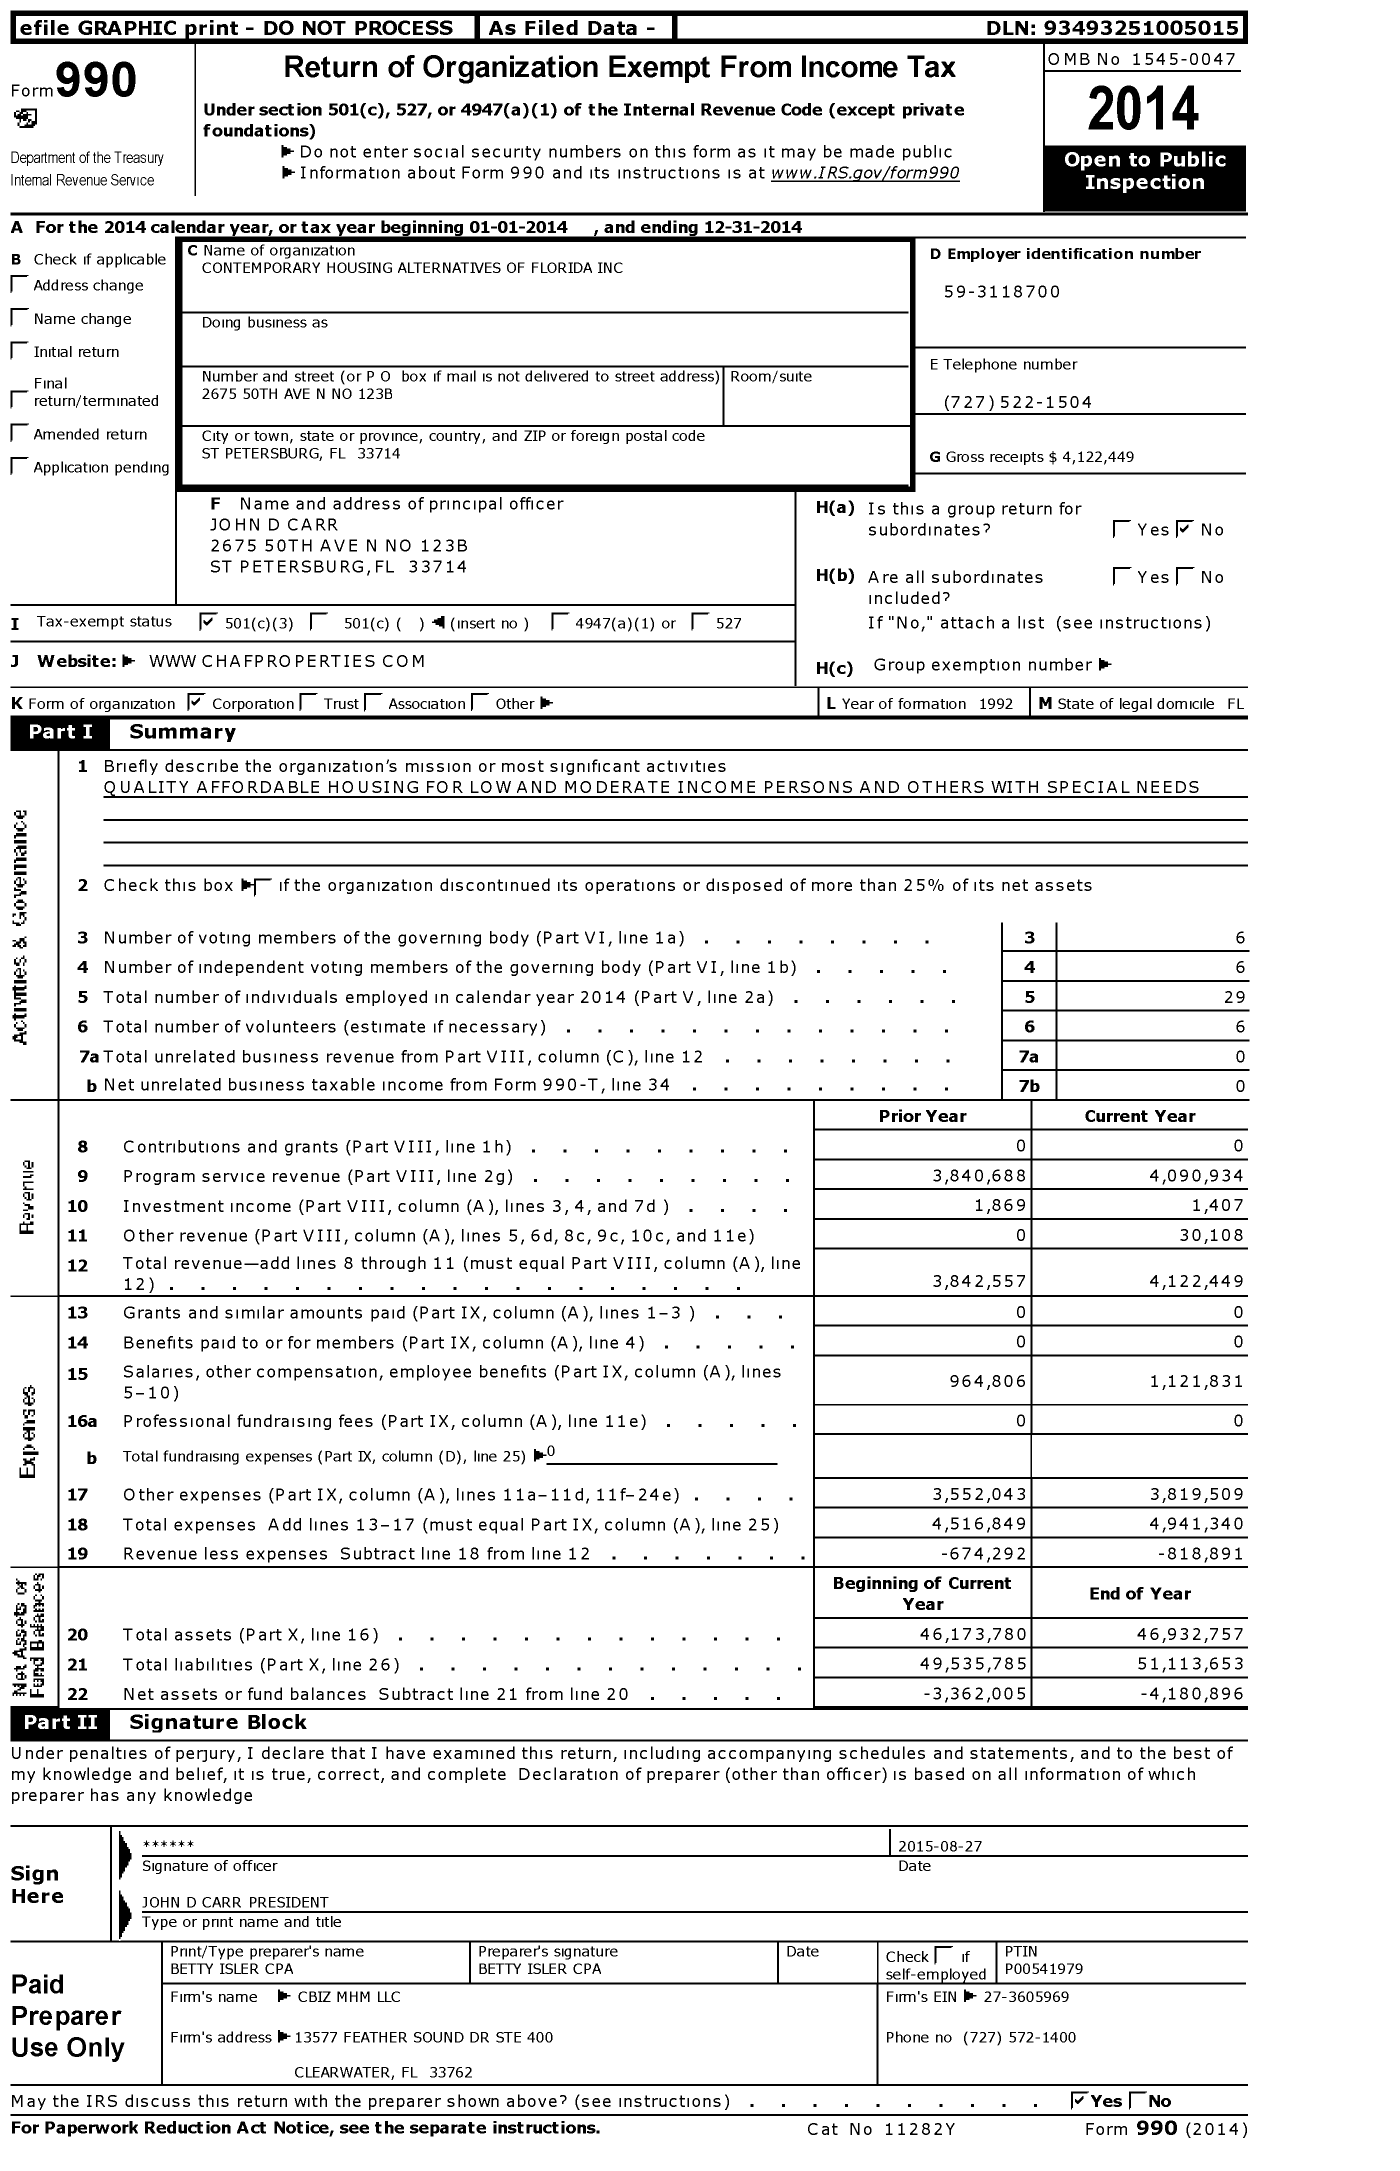 Image of first page of 2014 Form 990 for Contemporary Housing Alternatives of Florida (CHAF)